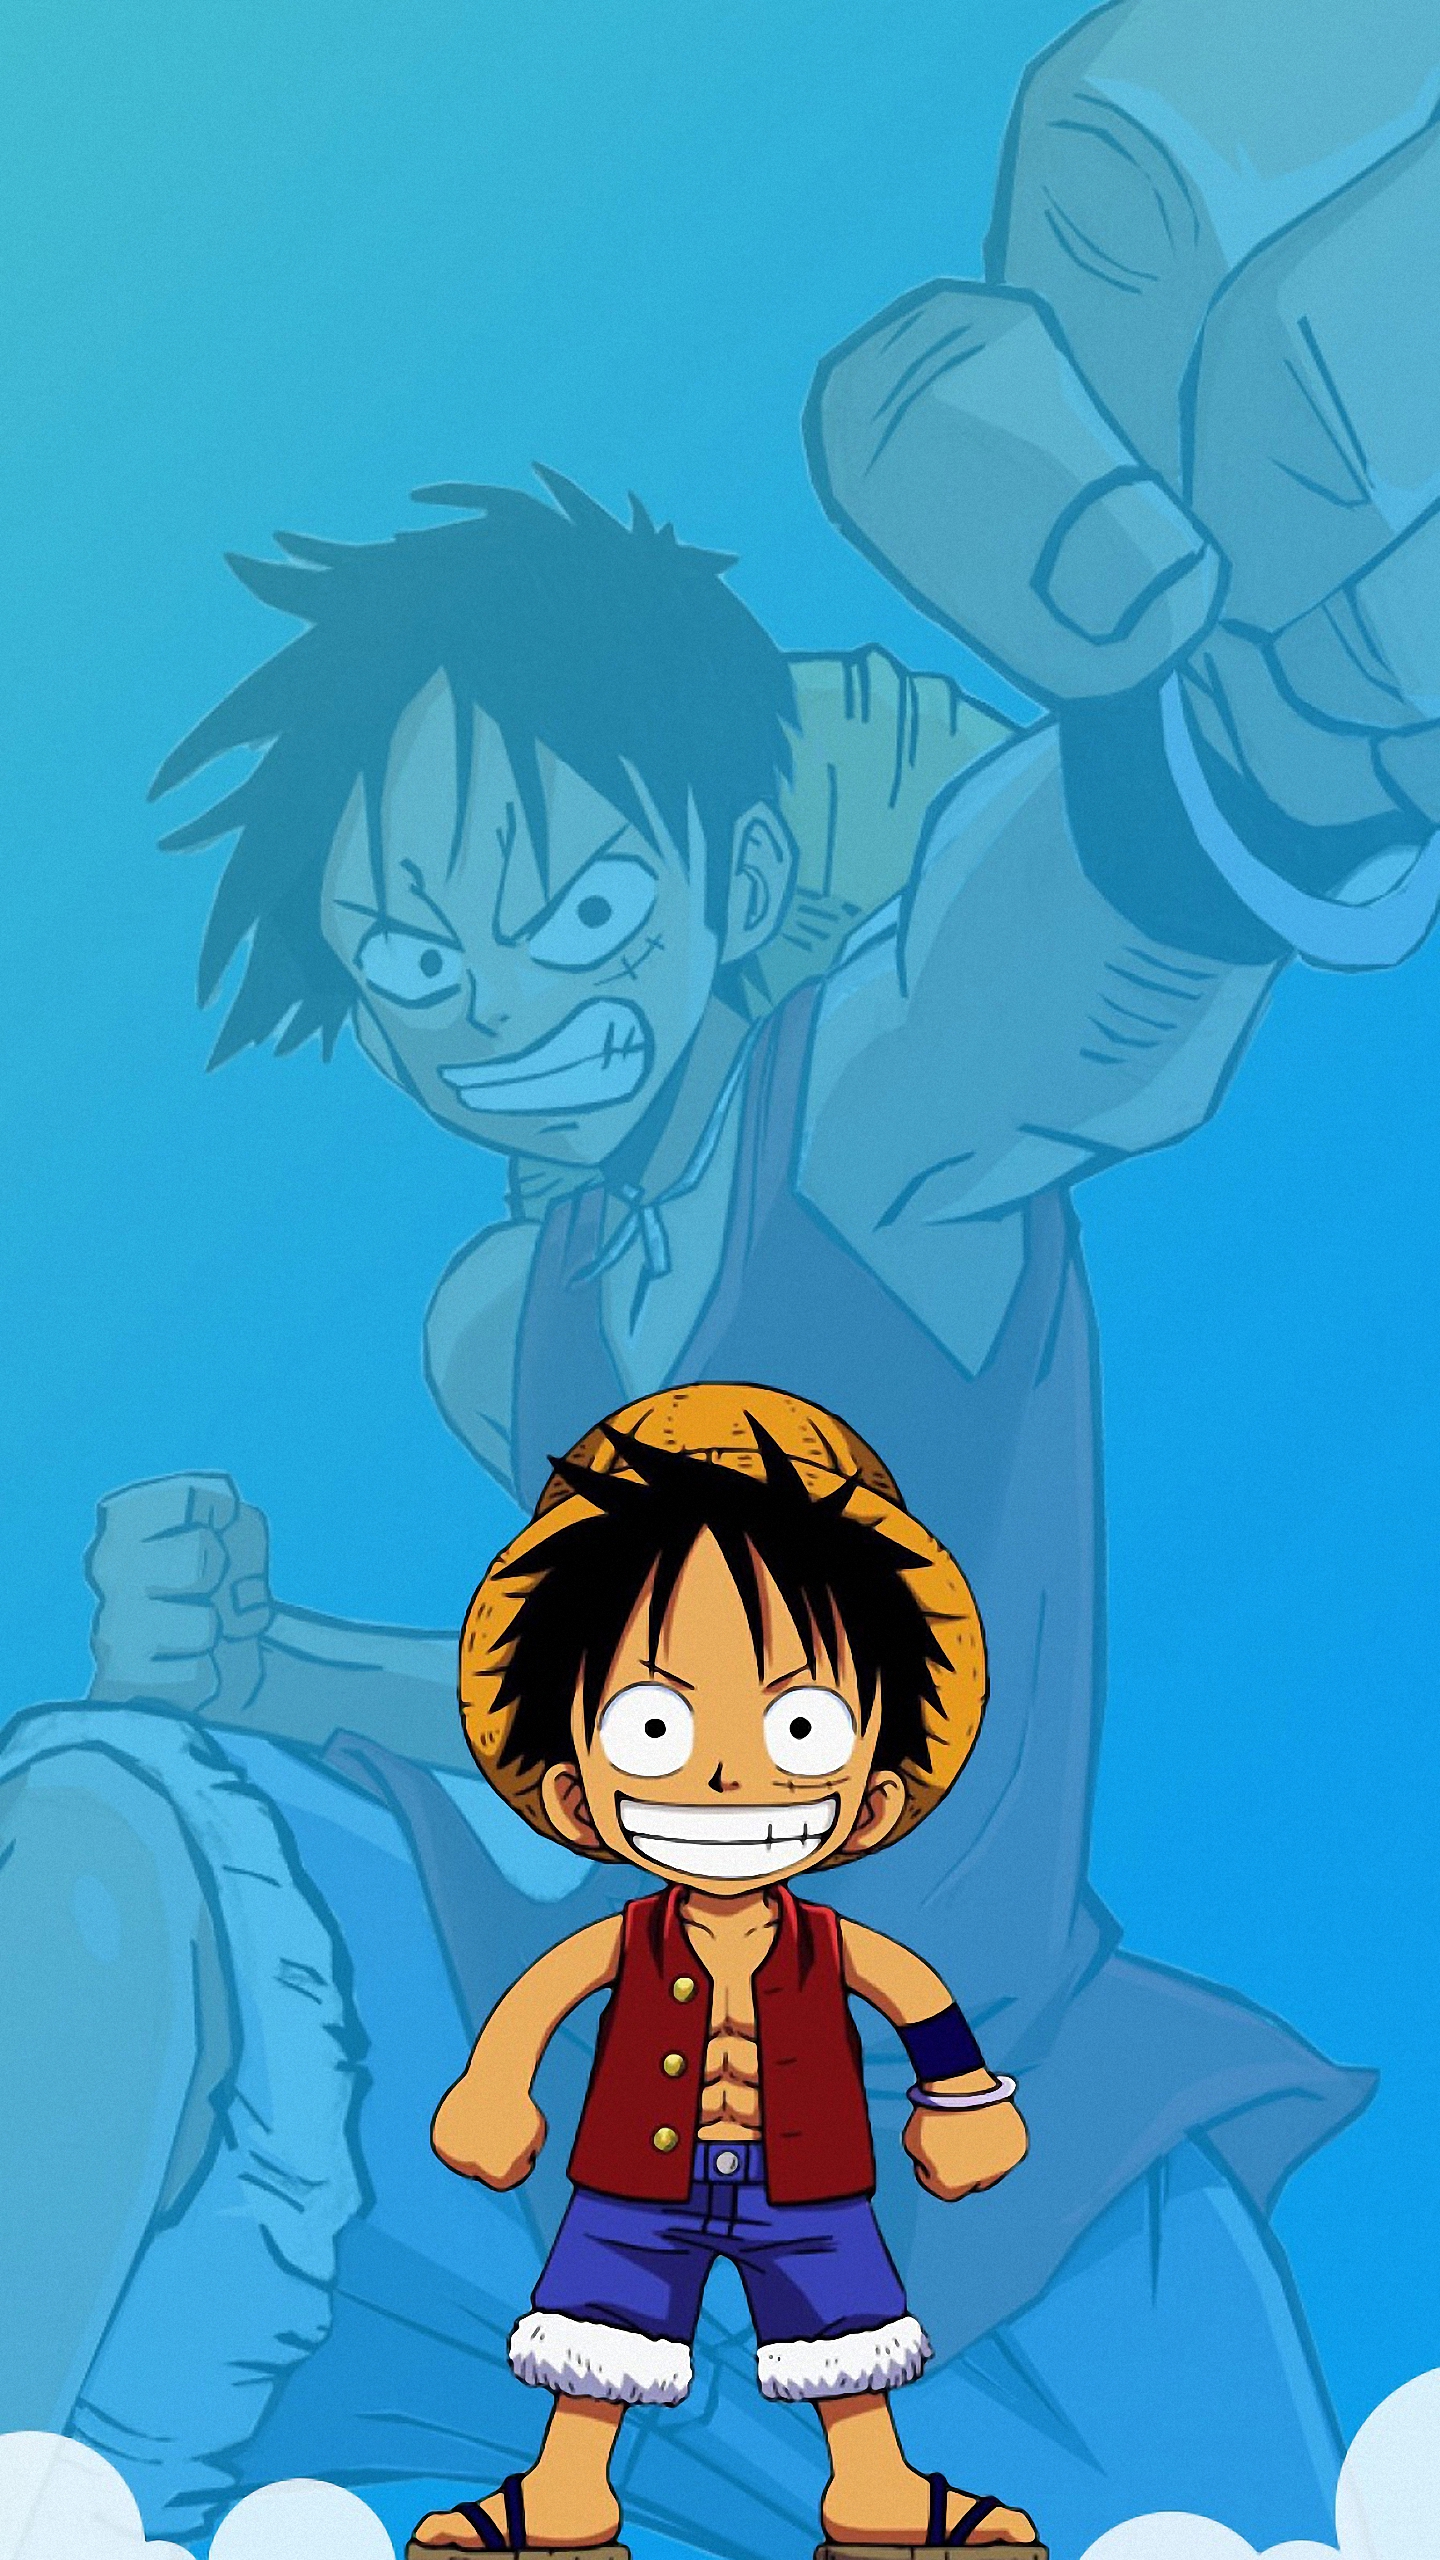 Wallpaper Hd For Mobile One Piece